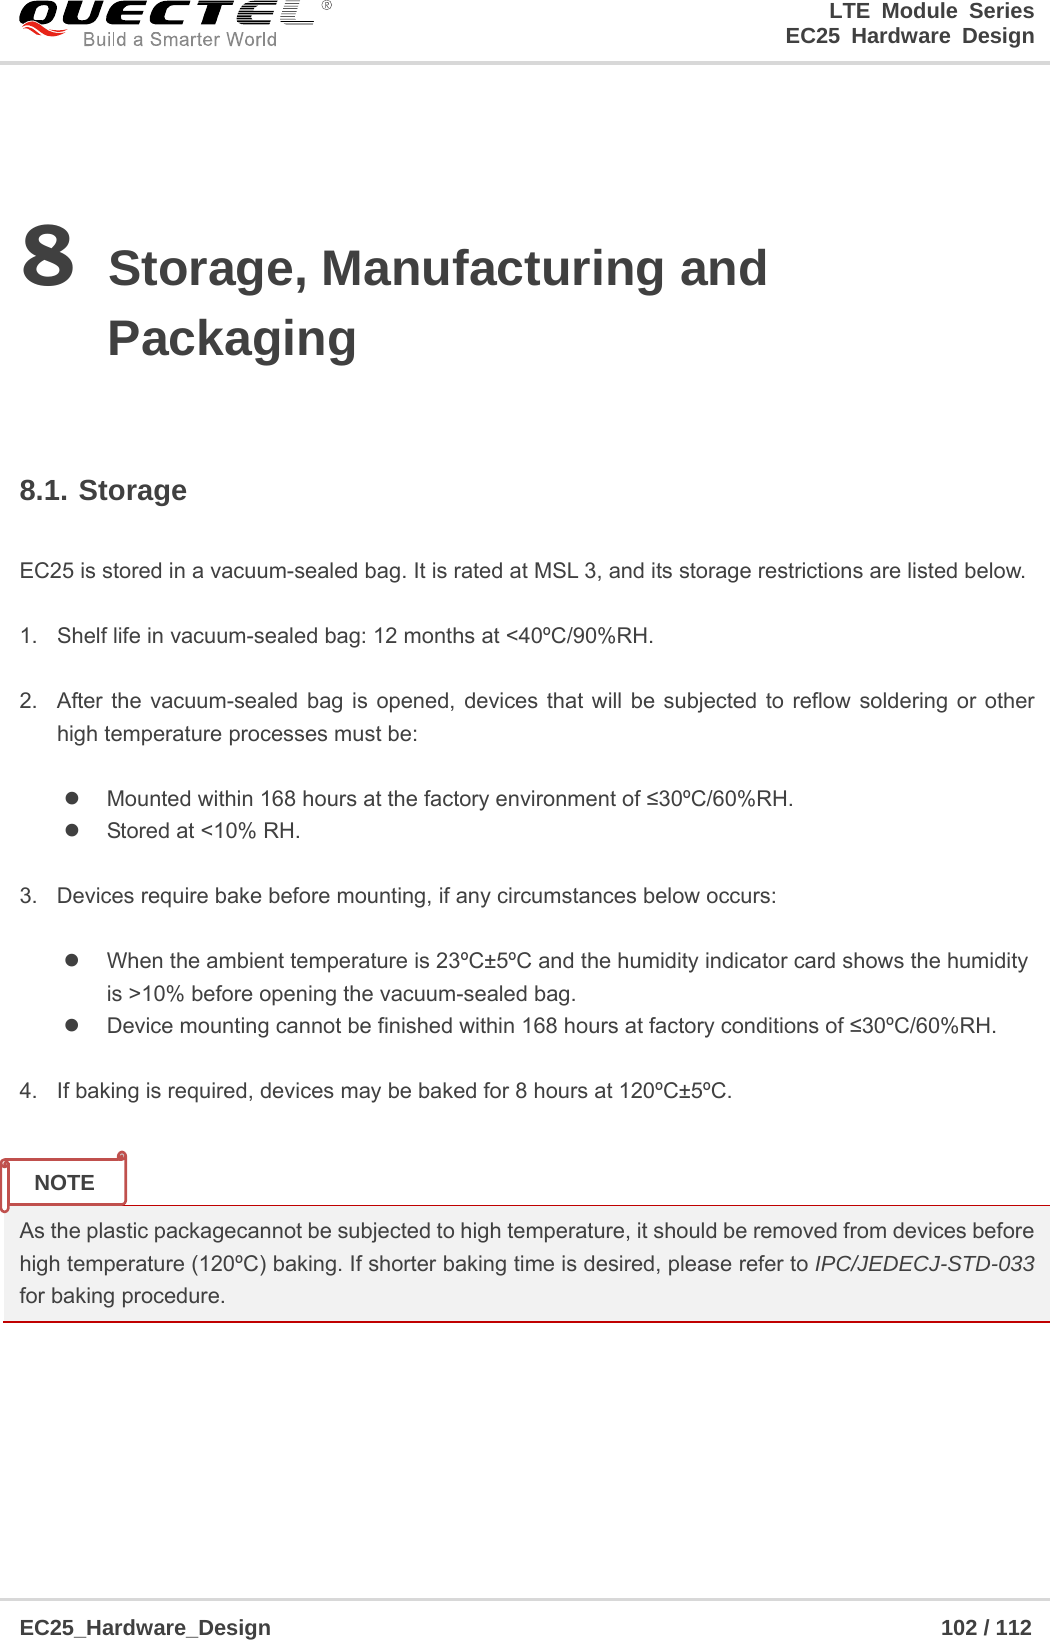 LTE Module Series                                                  EC25 Hardware Design  EC25_Hardware_Design                                                             102 / 112    8 Storage, Manufacturing and Packaging  8.1. Storage  EC25 is stored in a vacuum-sealed bag. It is rated at MSL 3, and its storage restrictions are listed below.    1.  Shelf life in vacuum-sealed bag: 12 months at &lt;40ºC/90%RH.    2.  After the vacuum-sealed bag is opened, devices that will be subjected to reflow soldering or other high temperature processes must be:    Mounted within 168 hours at the factory environment of ≤30ºC/60%RH.   Stored at &lt;10% RH.  3.  Devices require bake before mounting, if any circumstances below occurs:    When the ambient temperature is 23ºC±5ºC and the humidity indicator card shows the humidity           is &gt;10% before opening the vacuum-sealed bag.   Device mounting cannot be finished within 168 hours at factory conditions of ≤30ºC/60%RH.  4.  If baking is required, devices may be baked for 8 hours at 120ºC±5ºC.   As the plastic packagecannot be subjected to high temperature, it should be removed from devices before high temperature (120ºC) baking. If shorter baking time is desired, please refer to IPC/JEDECJ-STD-033 for baking procedure.      NOTE 